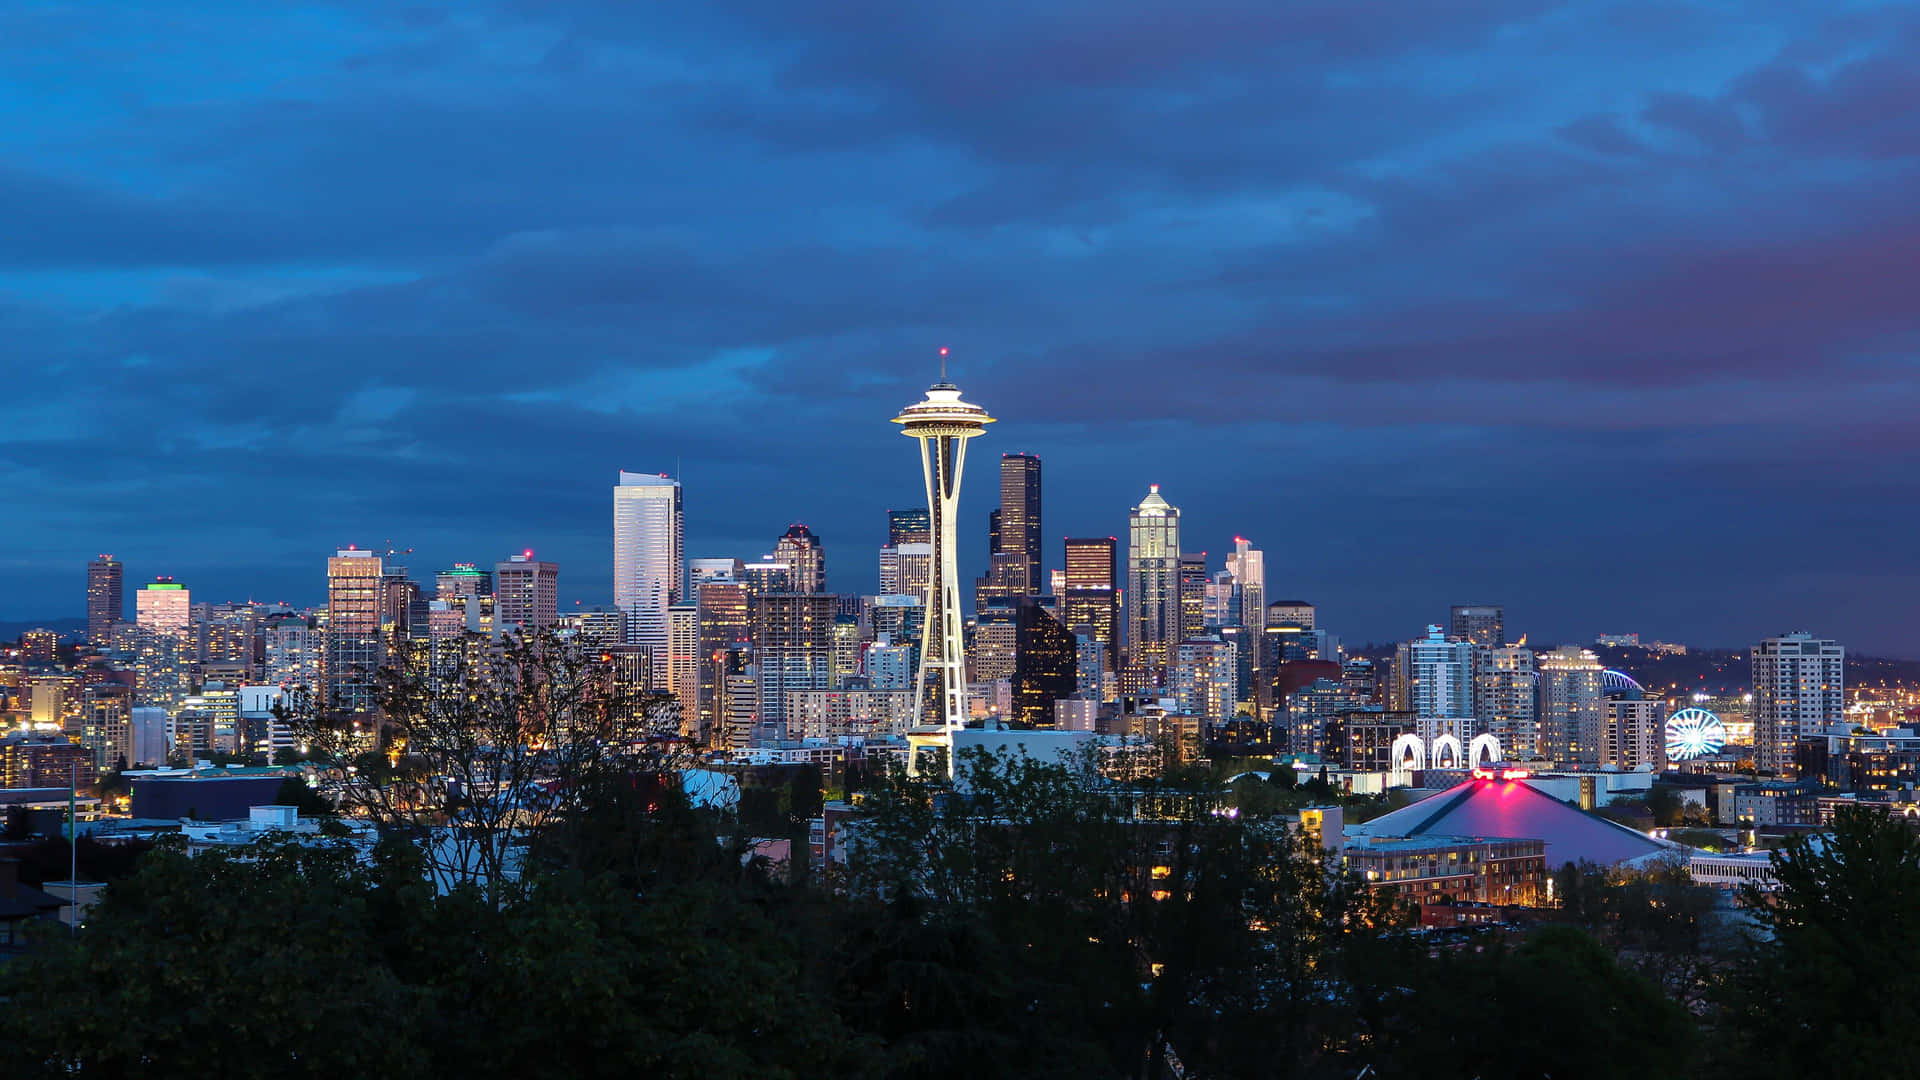 Enjoy a 360 View of Seattle's Scenic Landscape